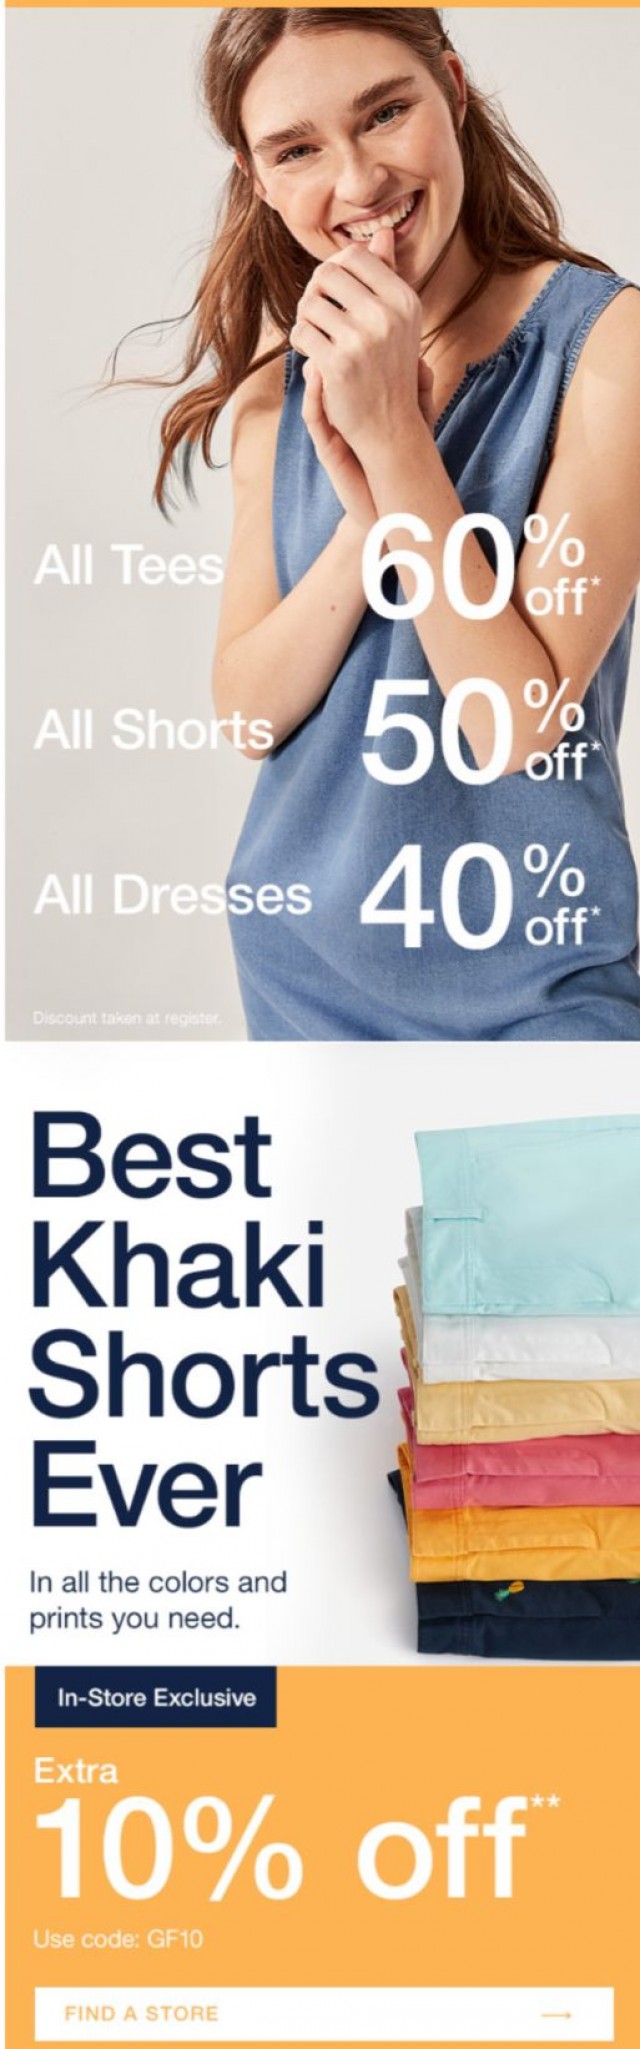 Coupon for: Gap - 60% off tees, 50% off shorts, 40% off dresses.